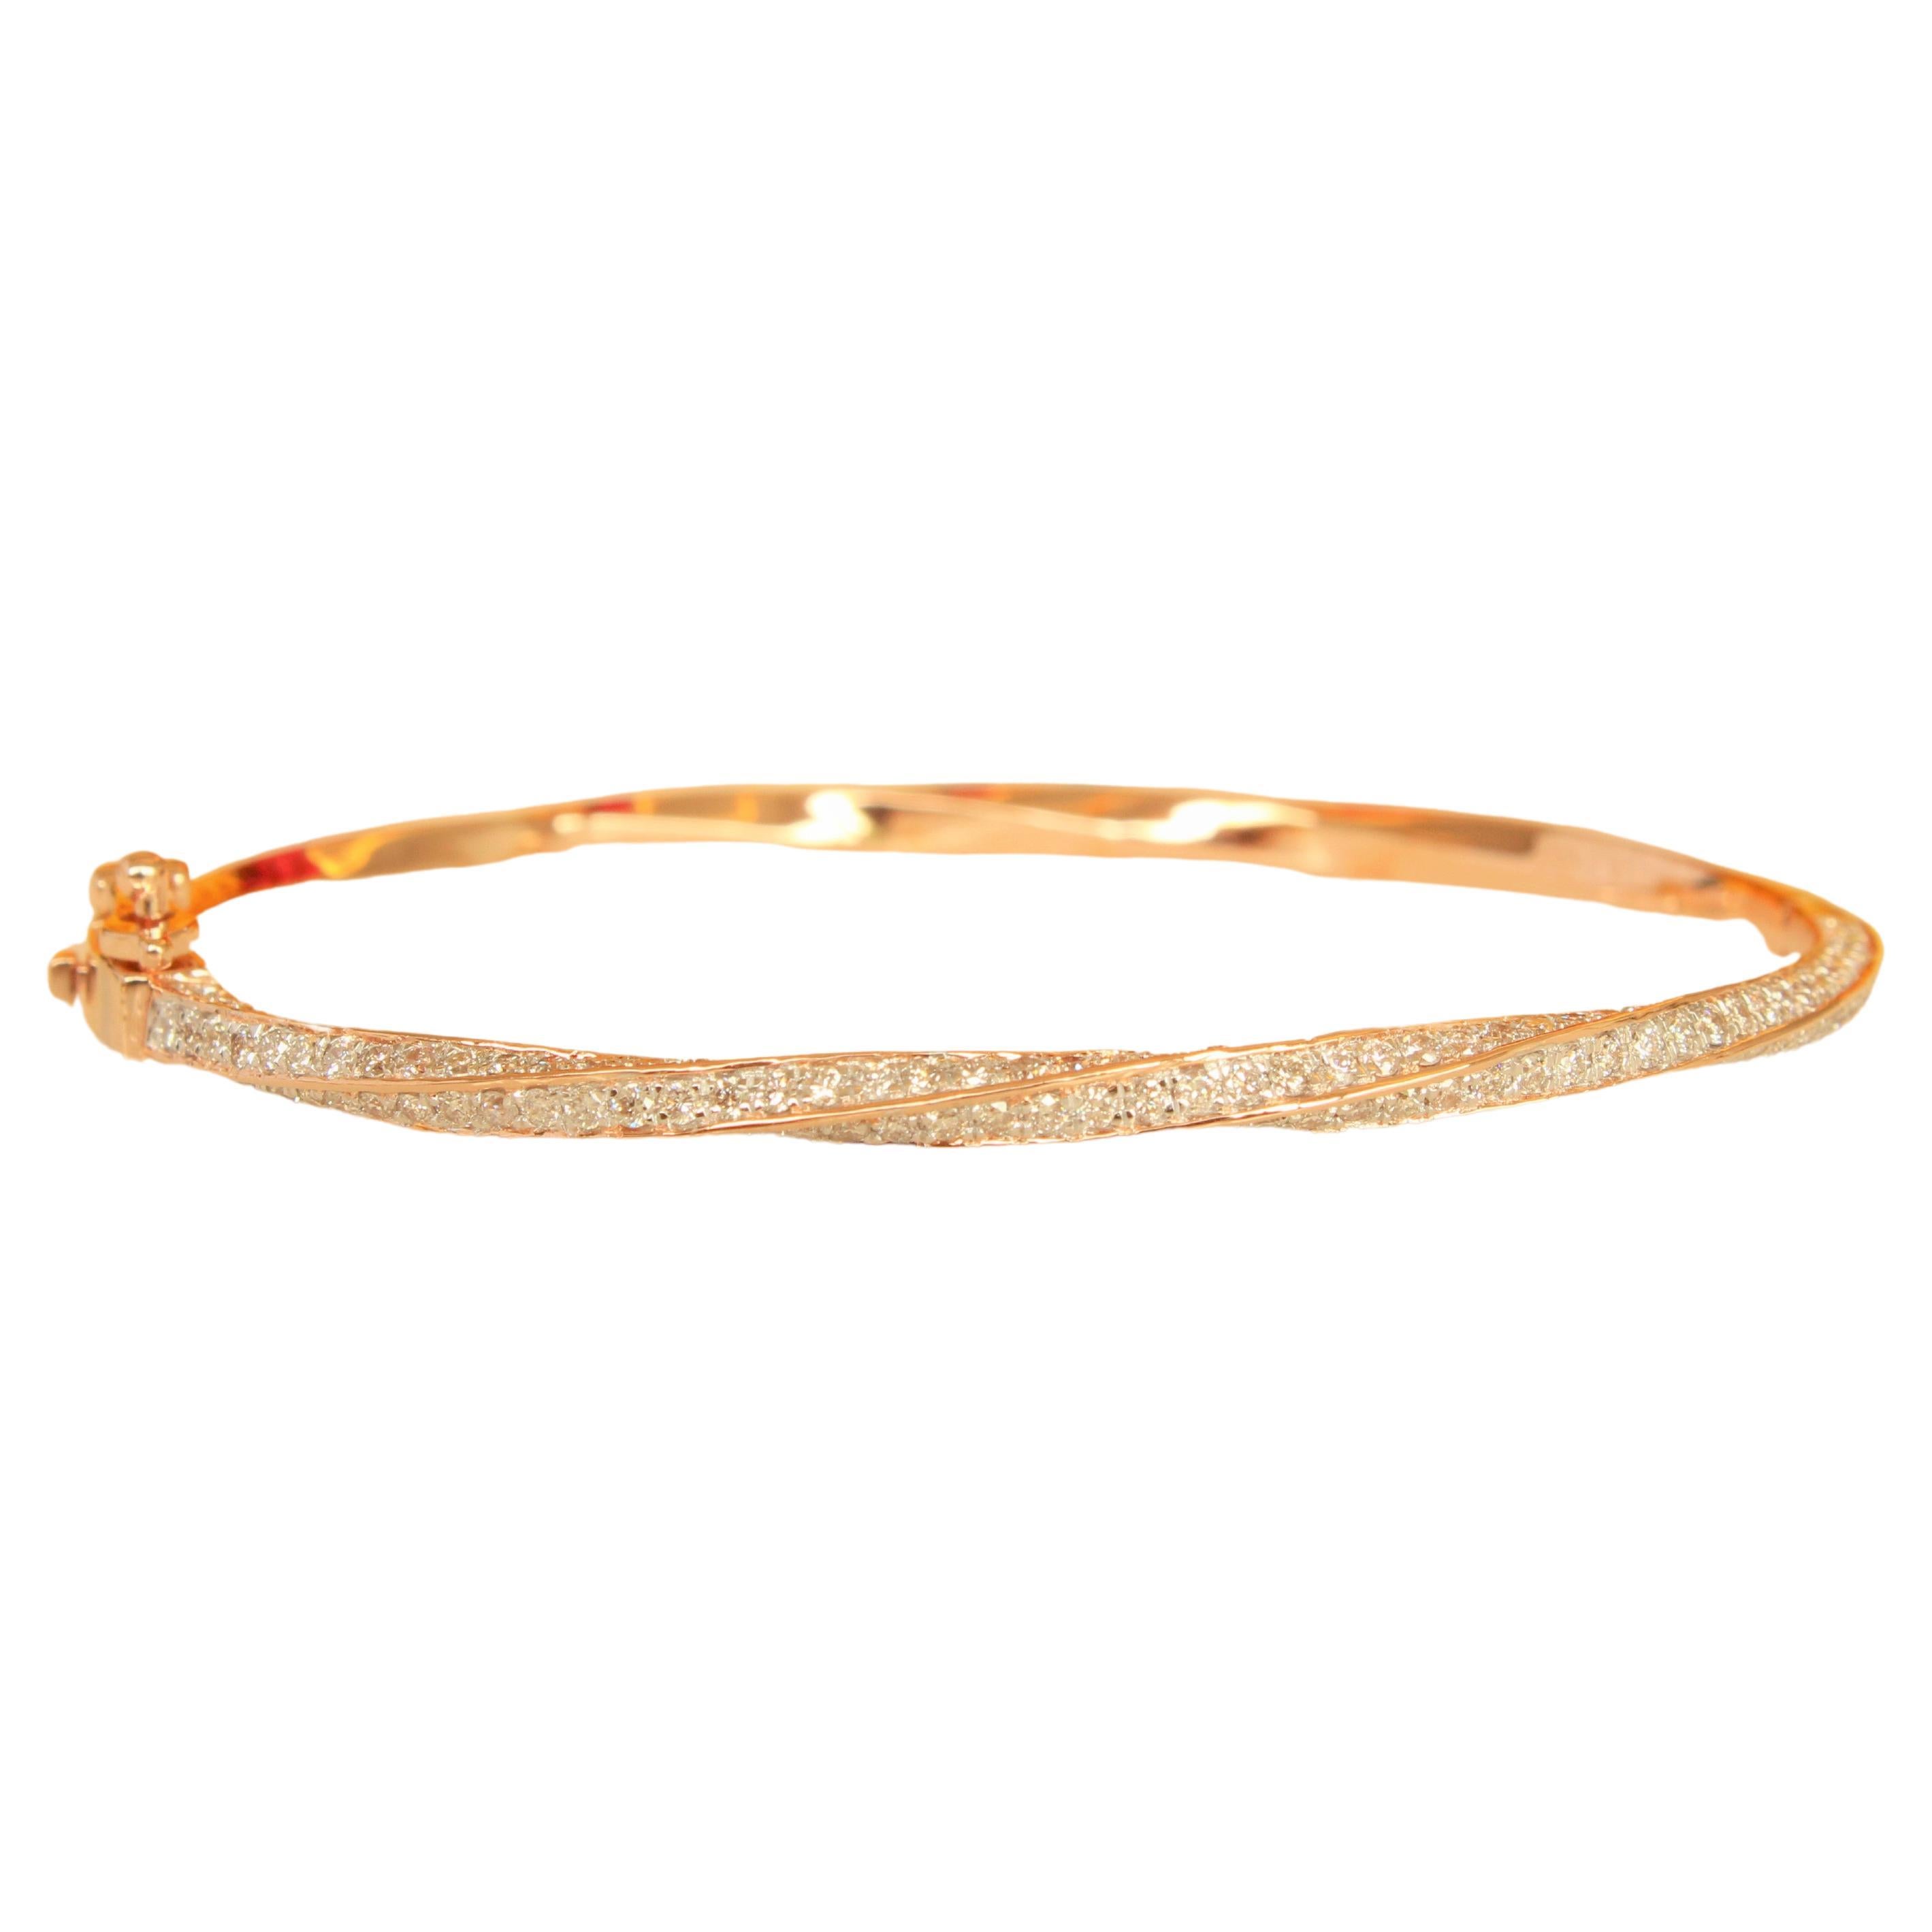 Classic 18K Gold Bracelet with Natural Diamond Accents